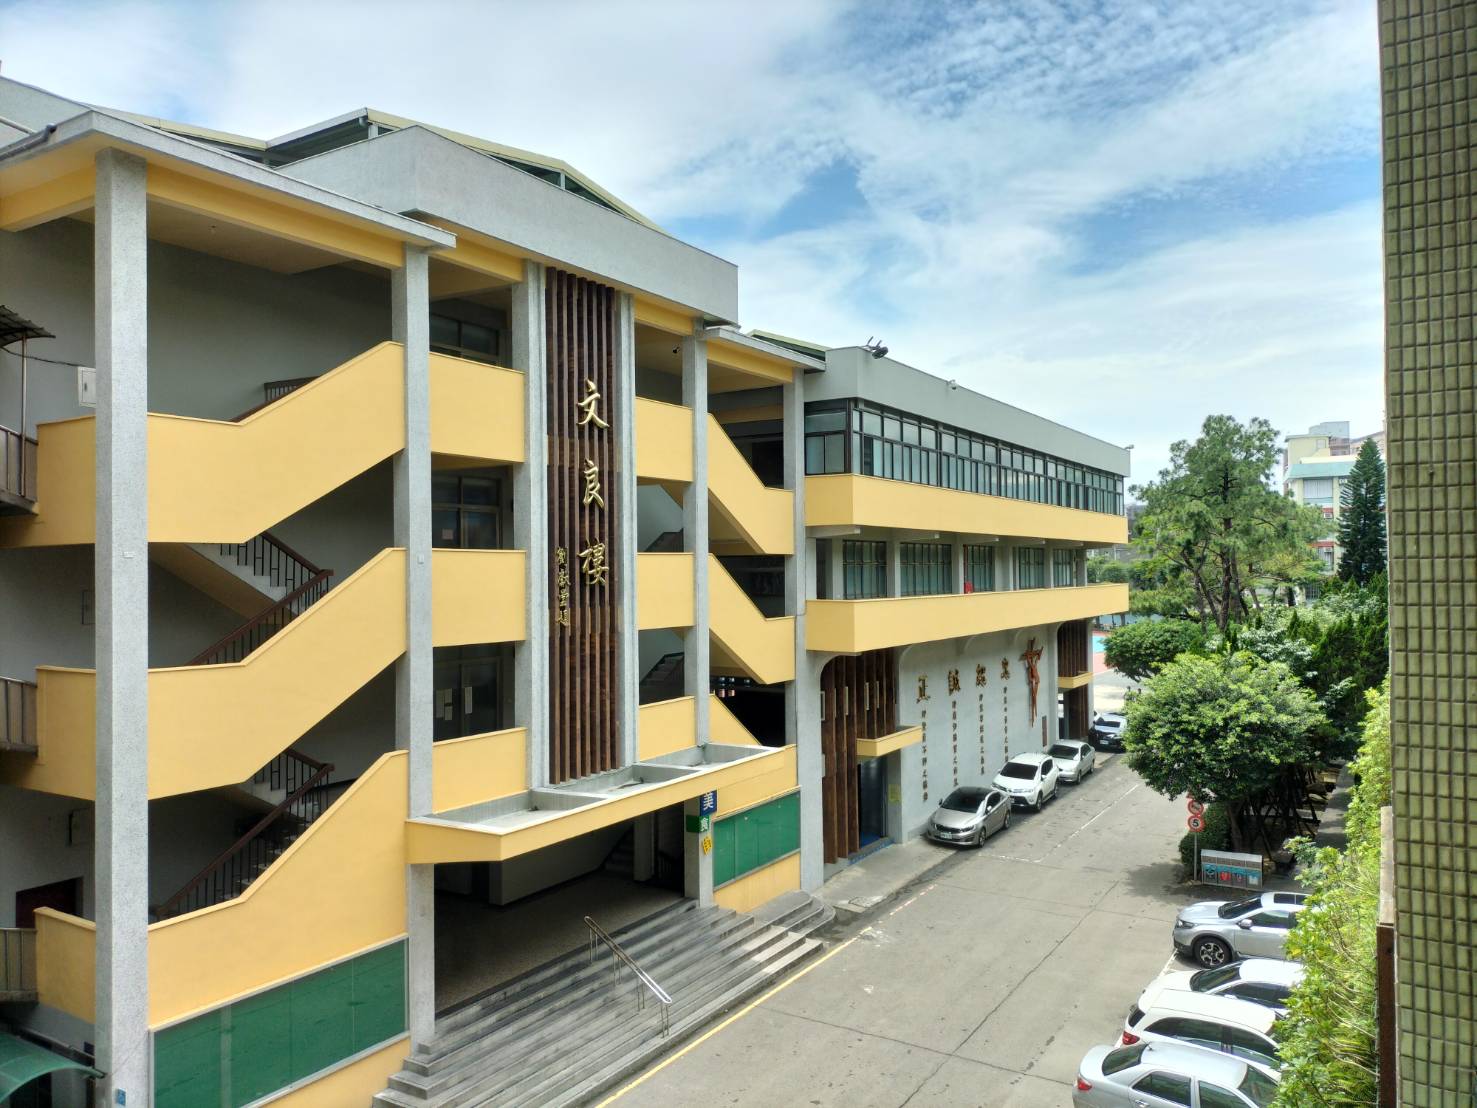 Teaching English and Living in Taiwan, Private Catholic Senior School Offers PERFECT Full-time Position! Up to NT$80,000+ / Month! Combined Junior and Senior High School on Big Leafy Green Campus in the Heart of the City! image